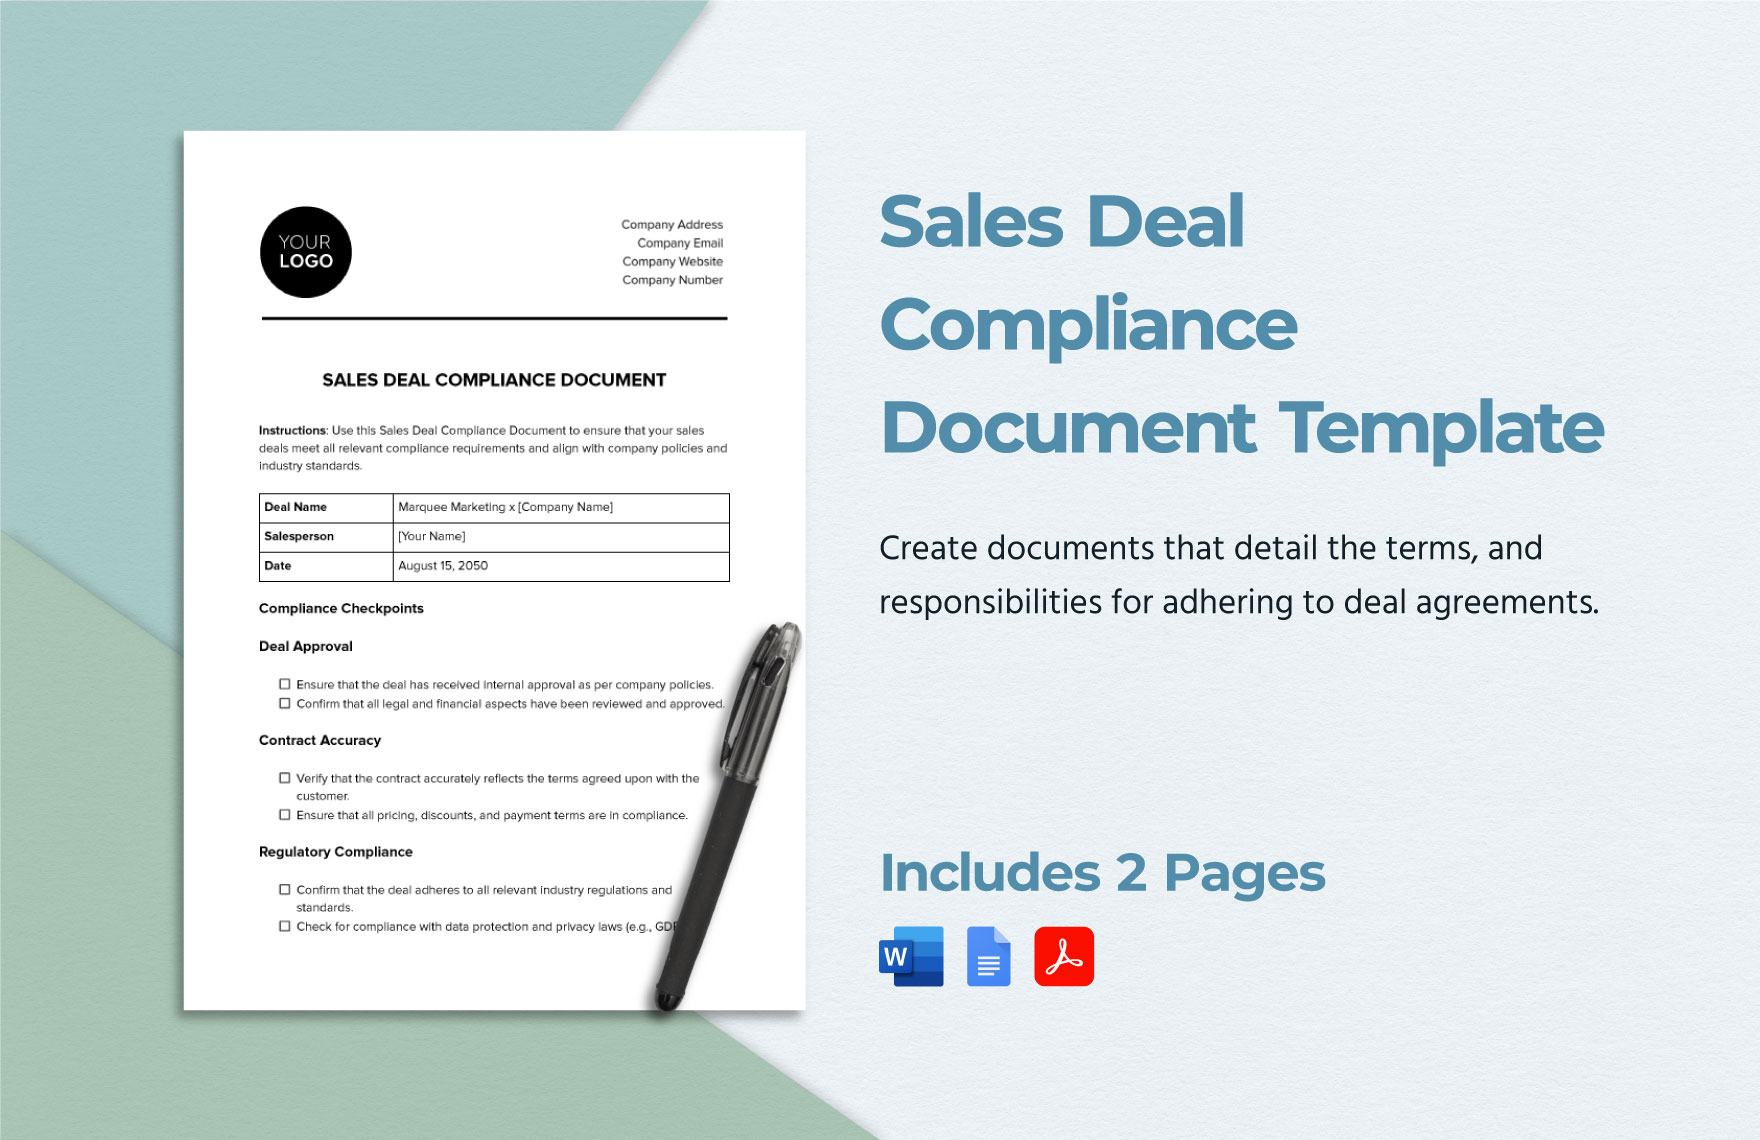 Sales Deal Compliance Document Template in Word, Google Docs, PDF